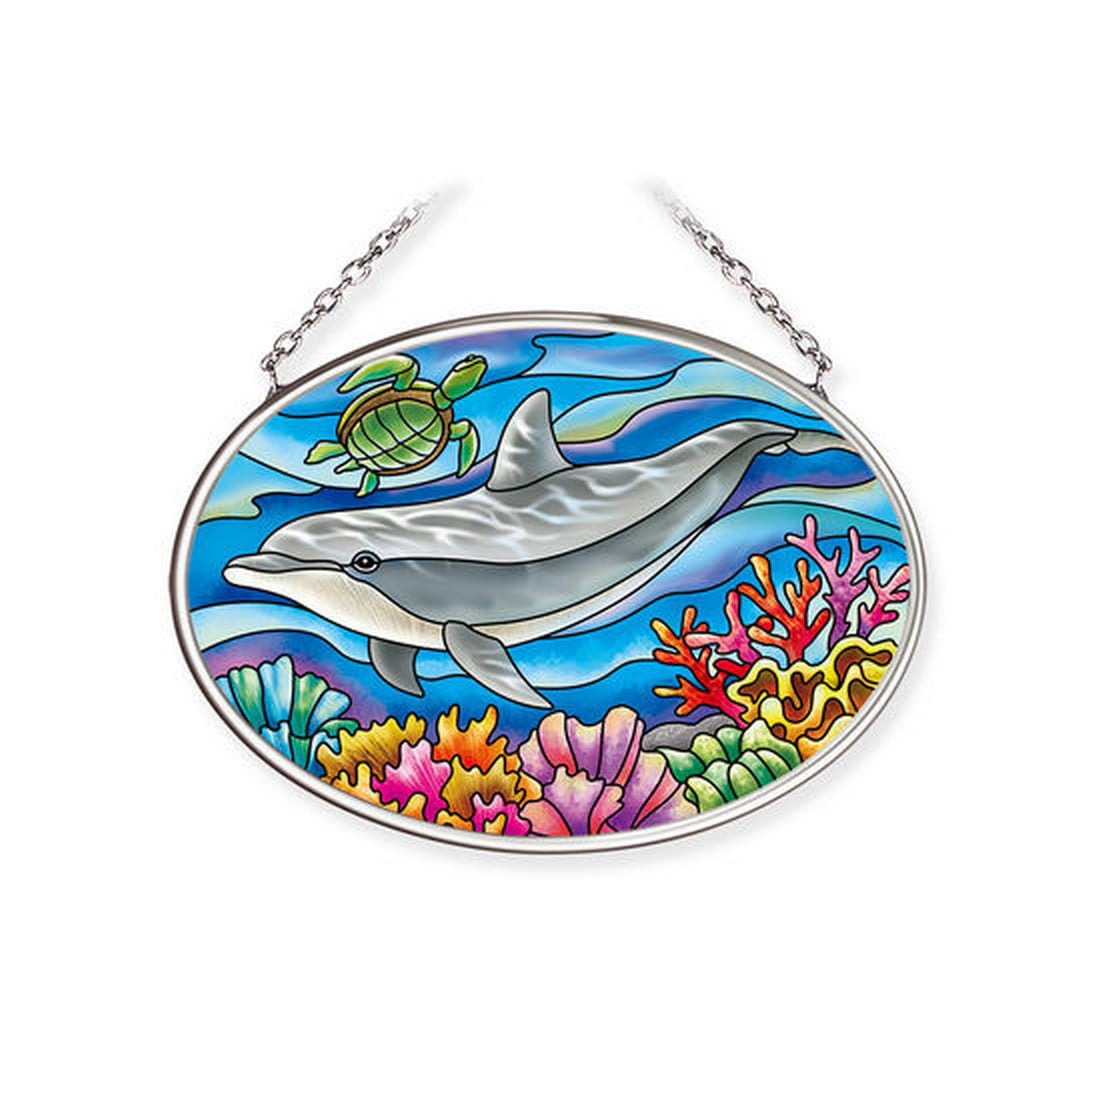 Amia Playful Dolphin Sun Catcher Small Oval 3 1/4 Inch by 4 1/2 Inch ...